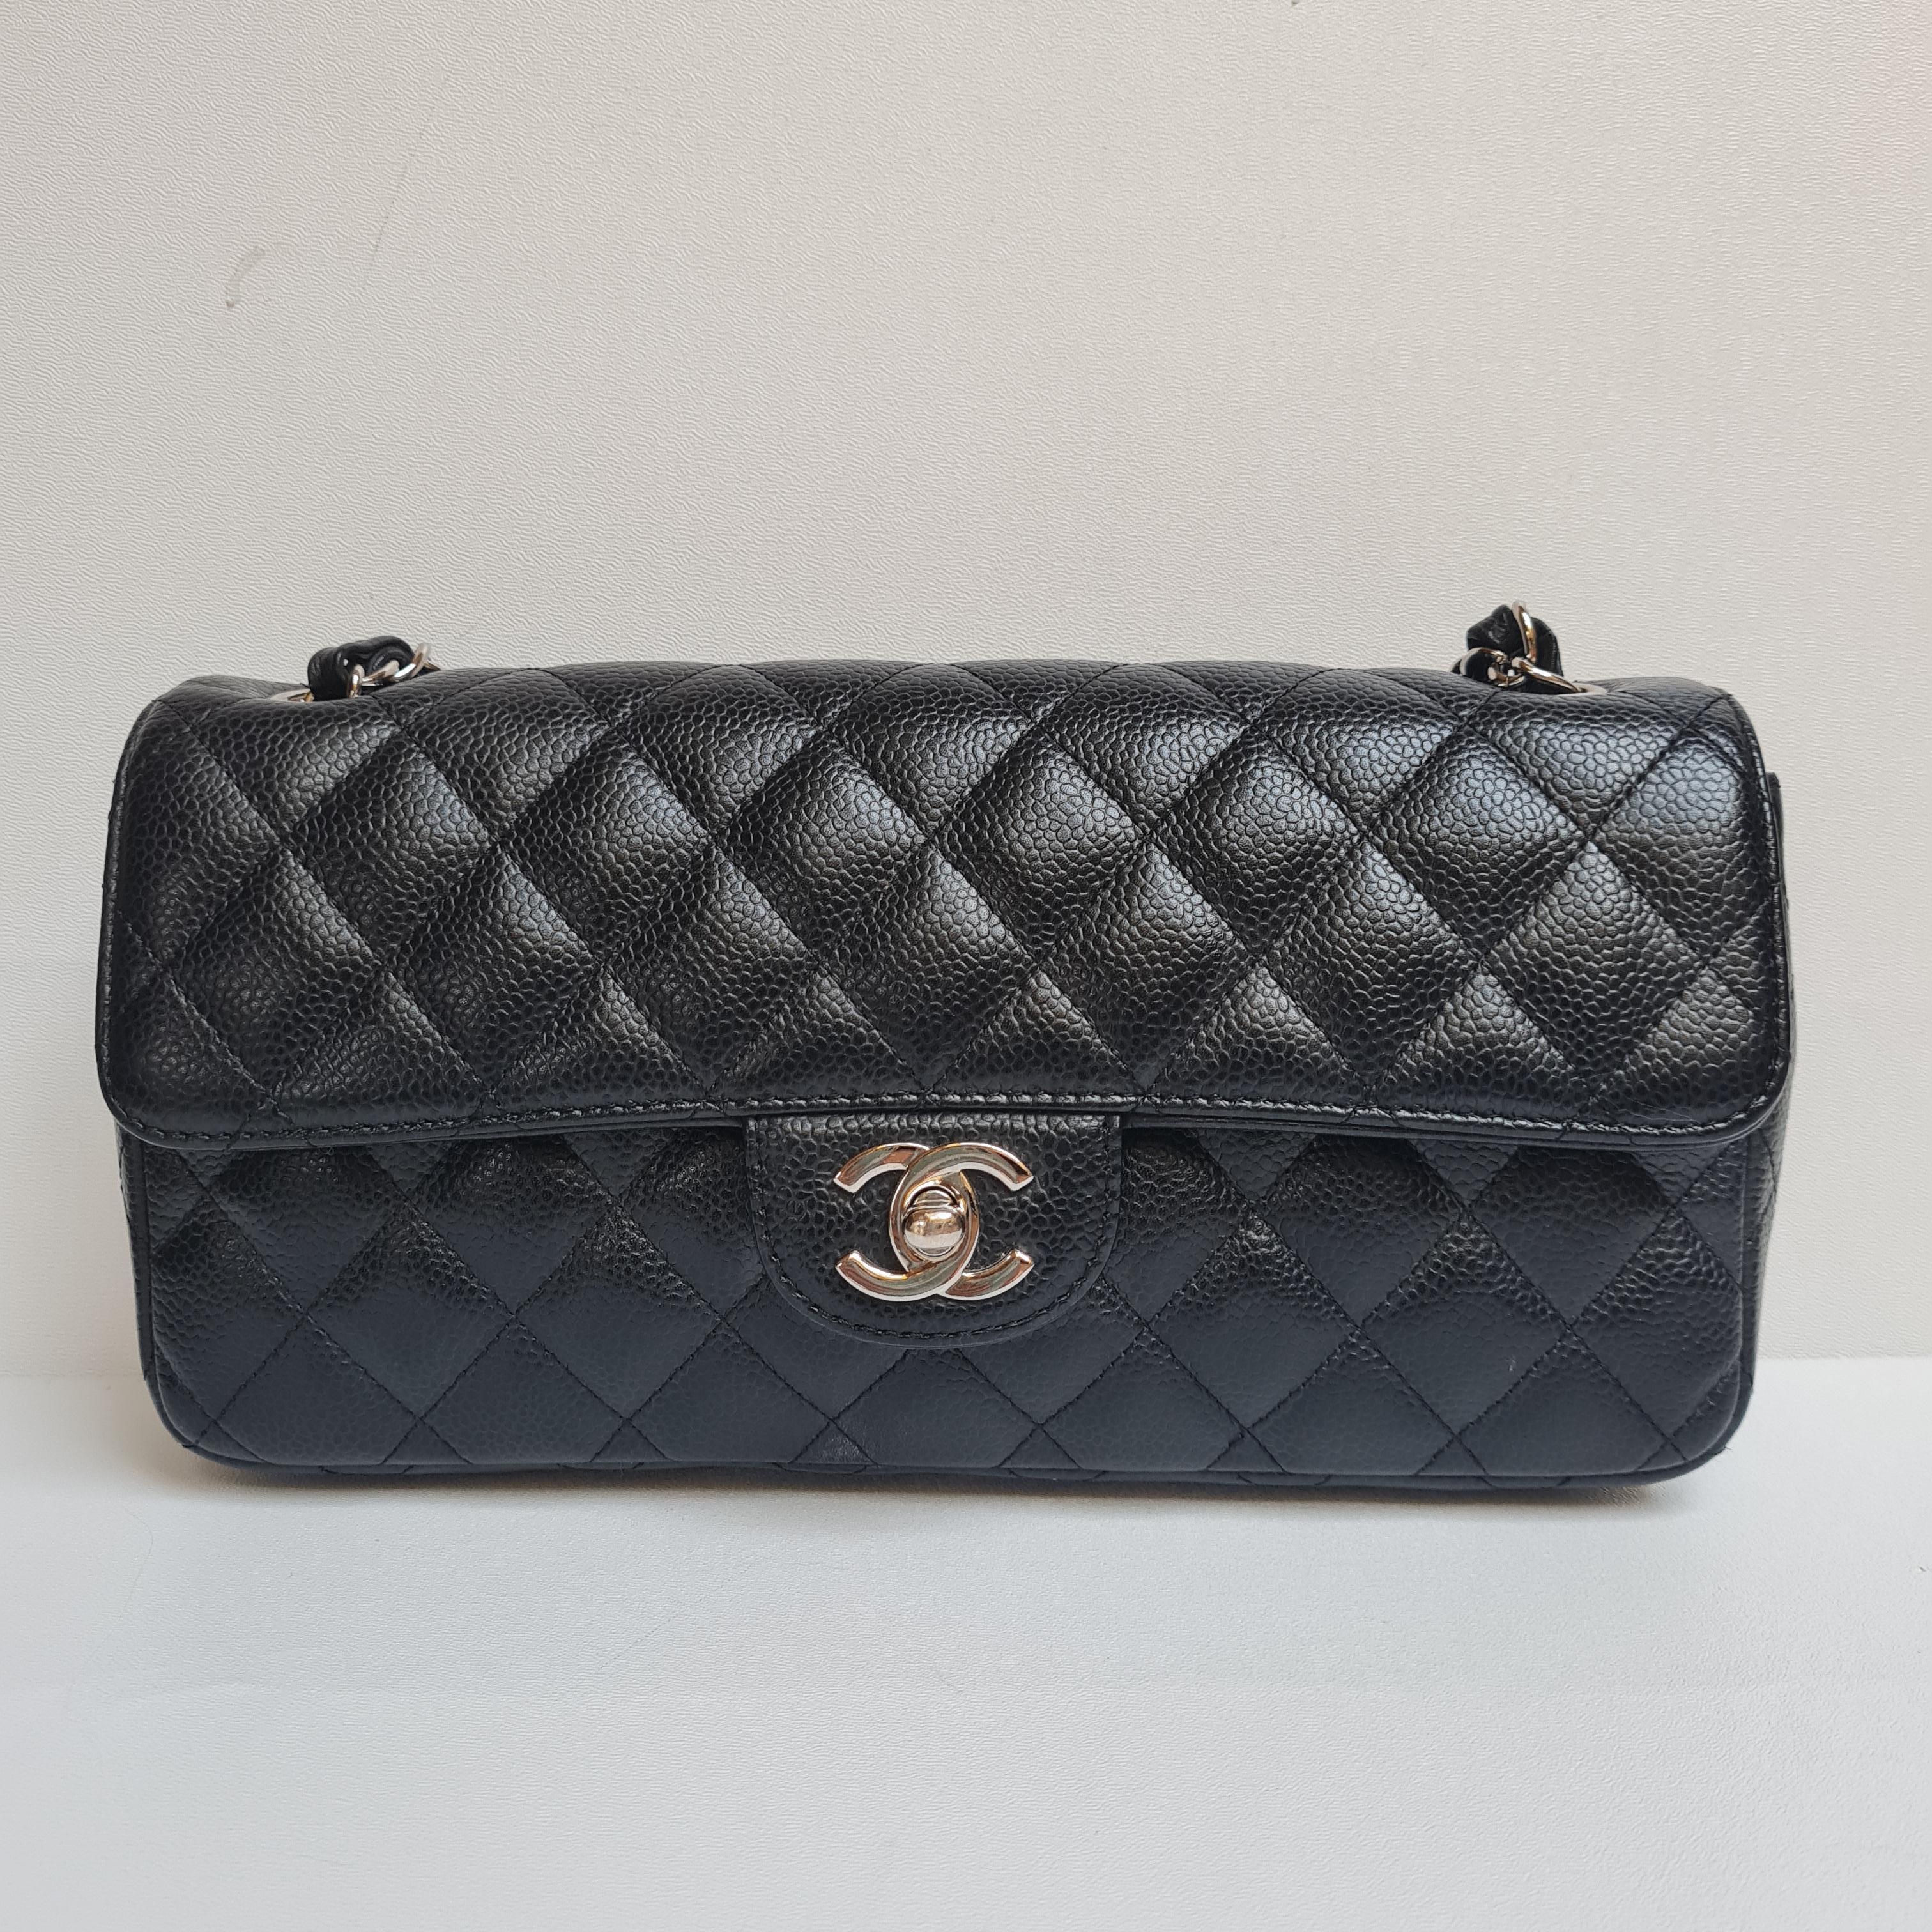 Chanel East west black caviar silver hardware. Item is still in great condition overall. Classic bag with a slightly different looks. Rare style in the market. Perfect as a shoulder bag.

Inclusion: Dust Bag, Box
Serial Number: #11
Closure: CC